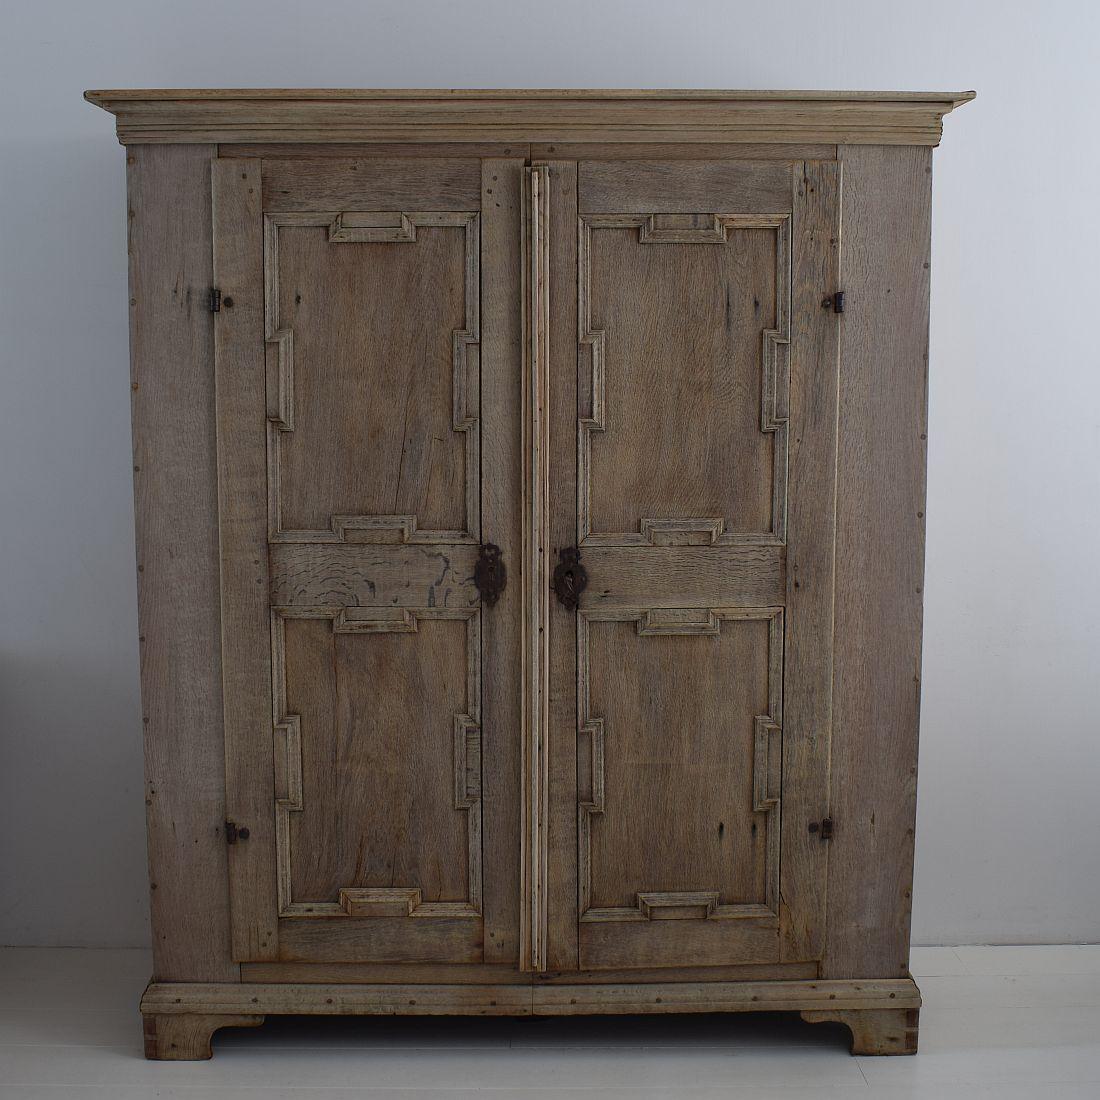 Rare and large Dutch oak armoire with hand forged iron hinges. Great weathered look.
Holland, circa 1750-1800. Made out of two pieces and a separate top for easier transport.
Weathered, small losses and old repairs.
More pictures are available on